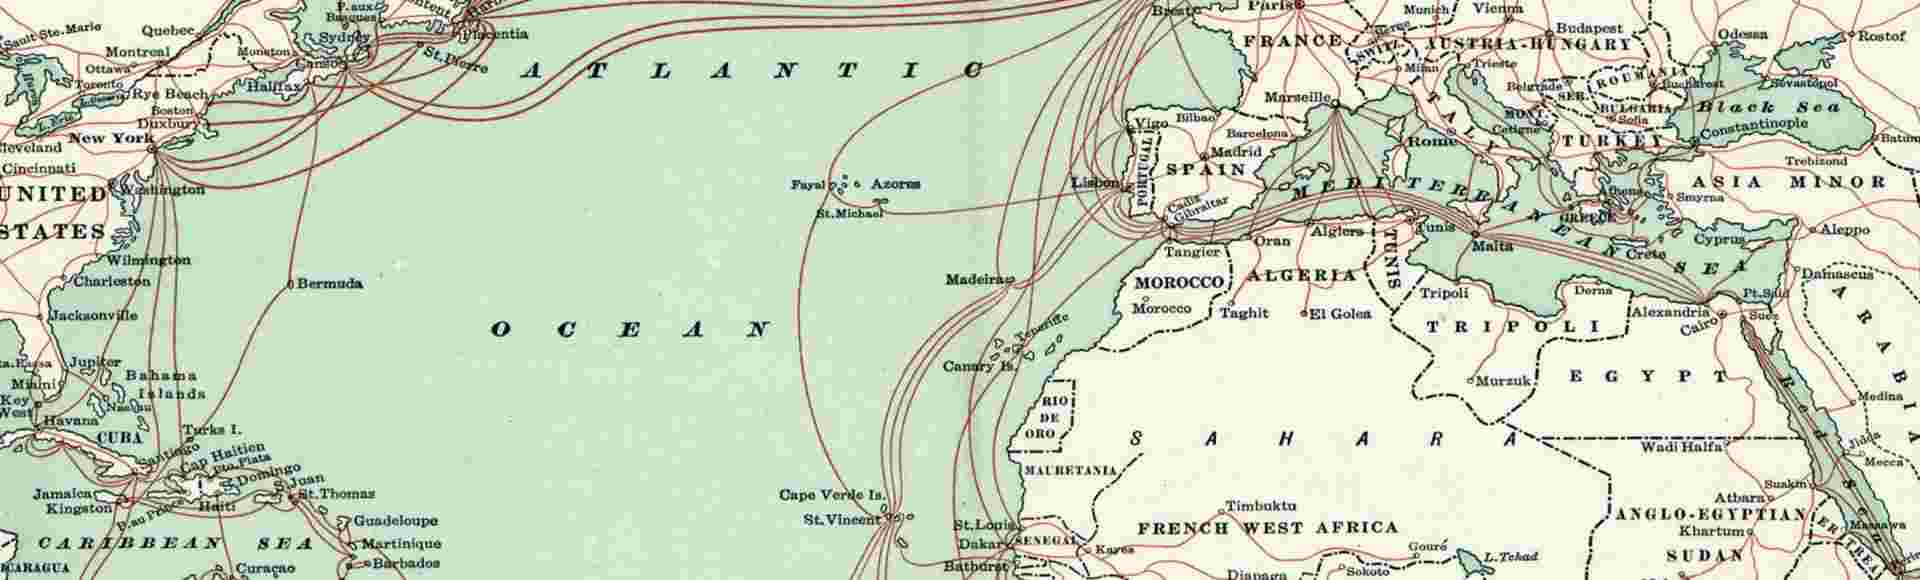 Western Union map showing routes of undersea telegraph cables in 1900.